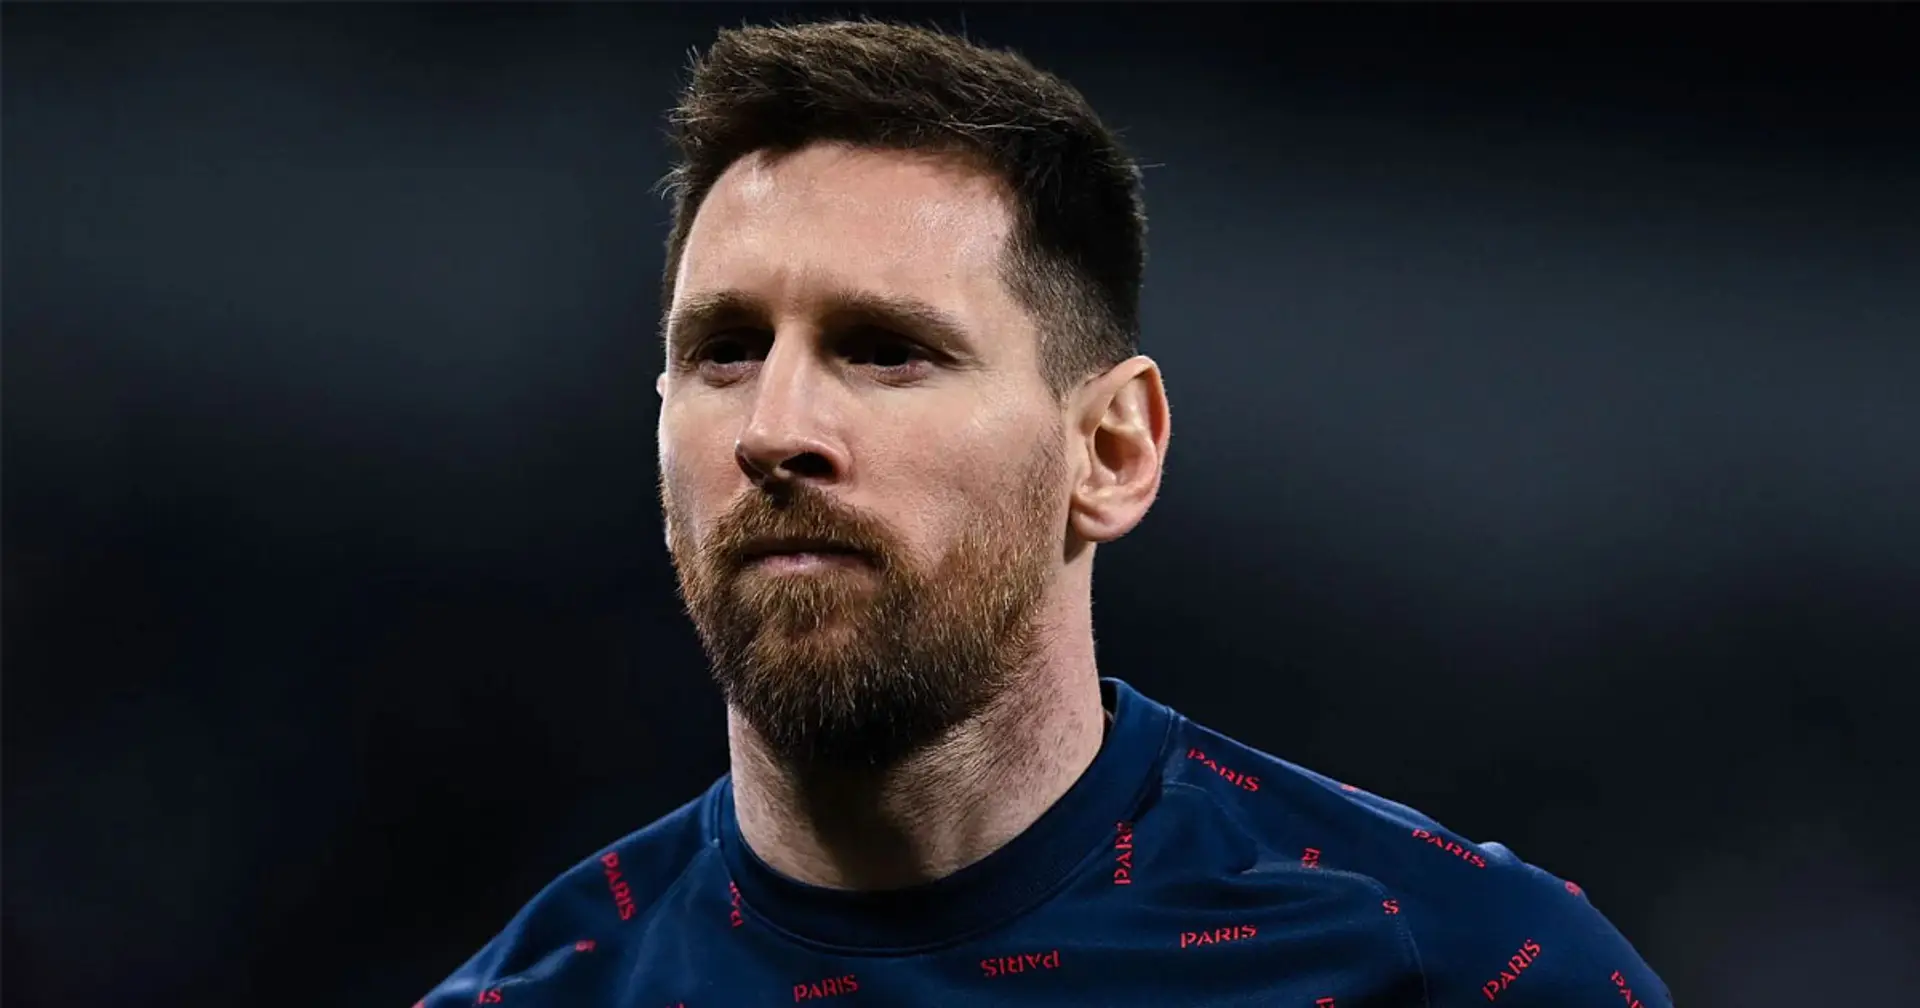 Messi has 'the worst big chance conversation rate' in Europe's top 5 leagues in 2021/22 season